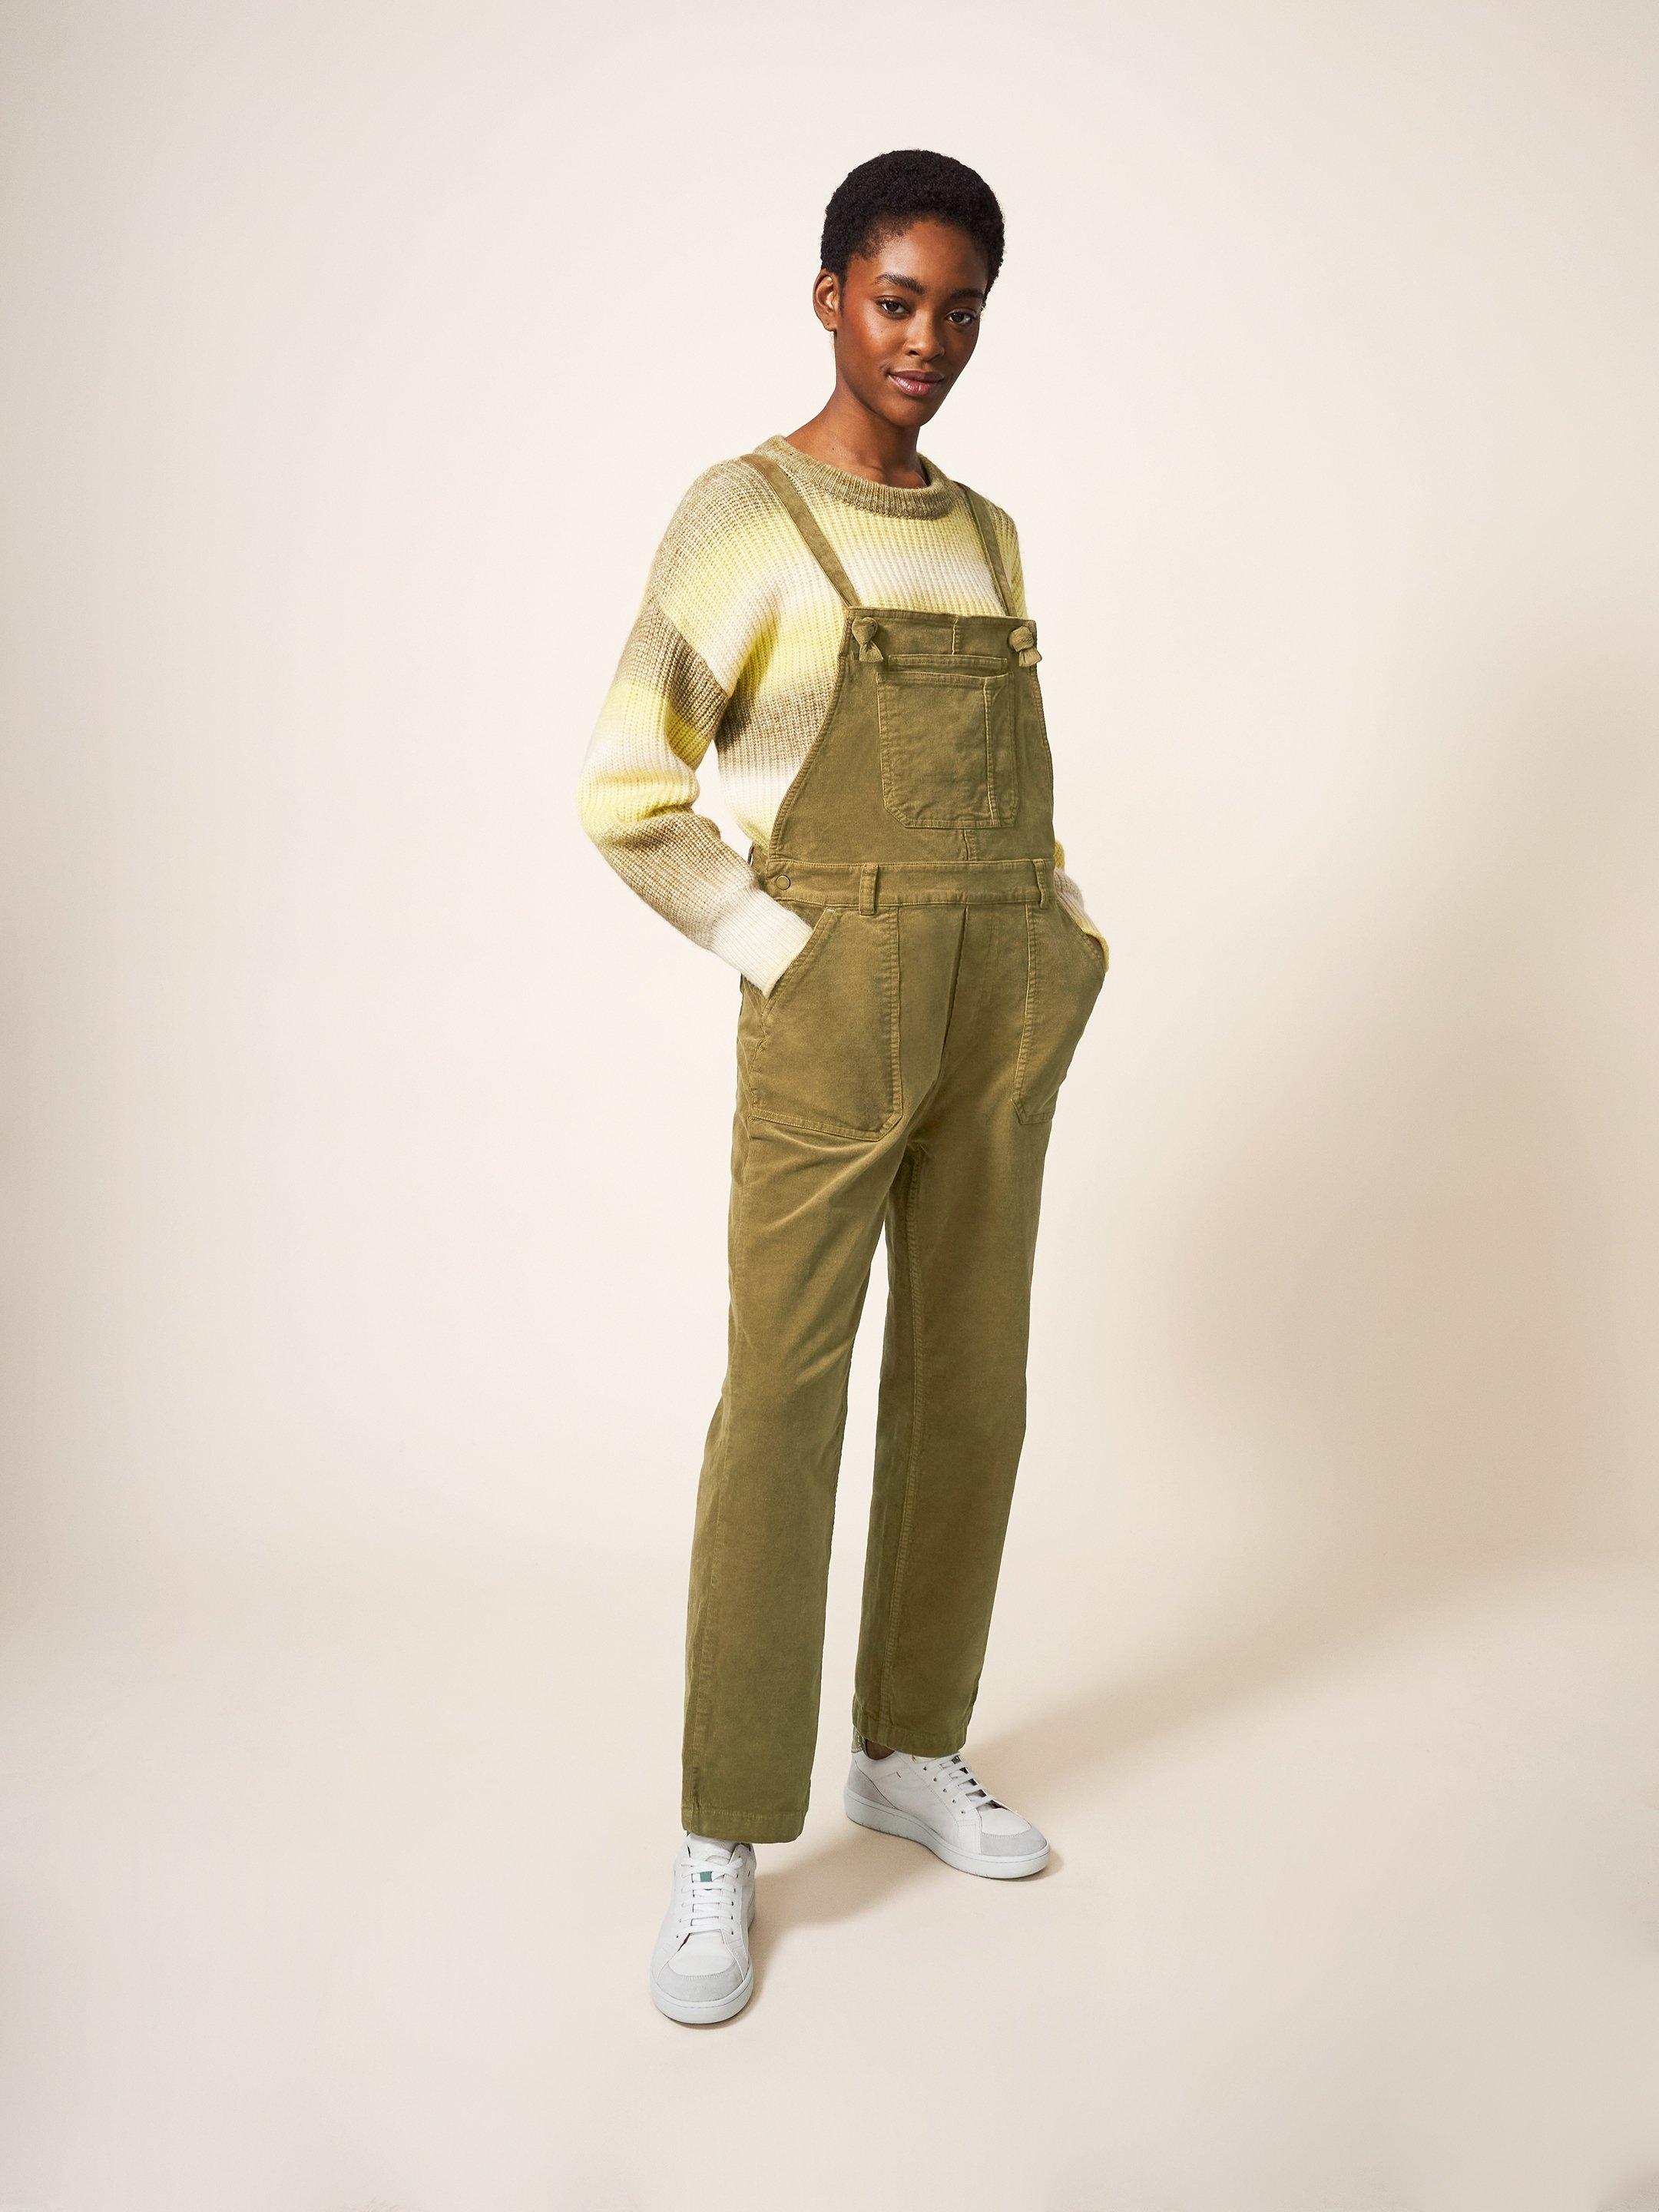 Shop Dungarees and Jumpsuits - Linen Dungarees, Denim Dungarees